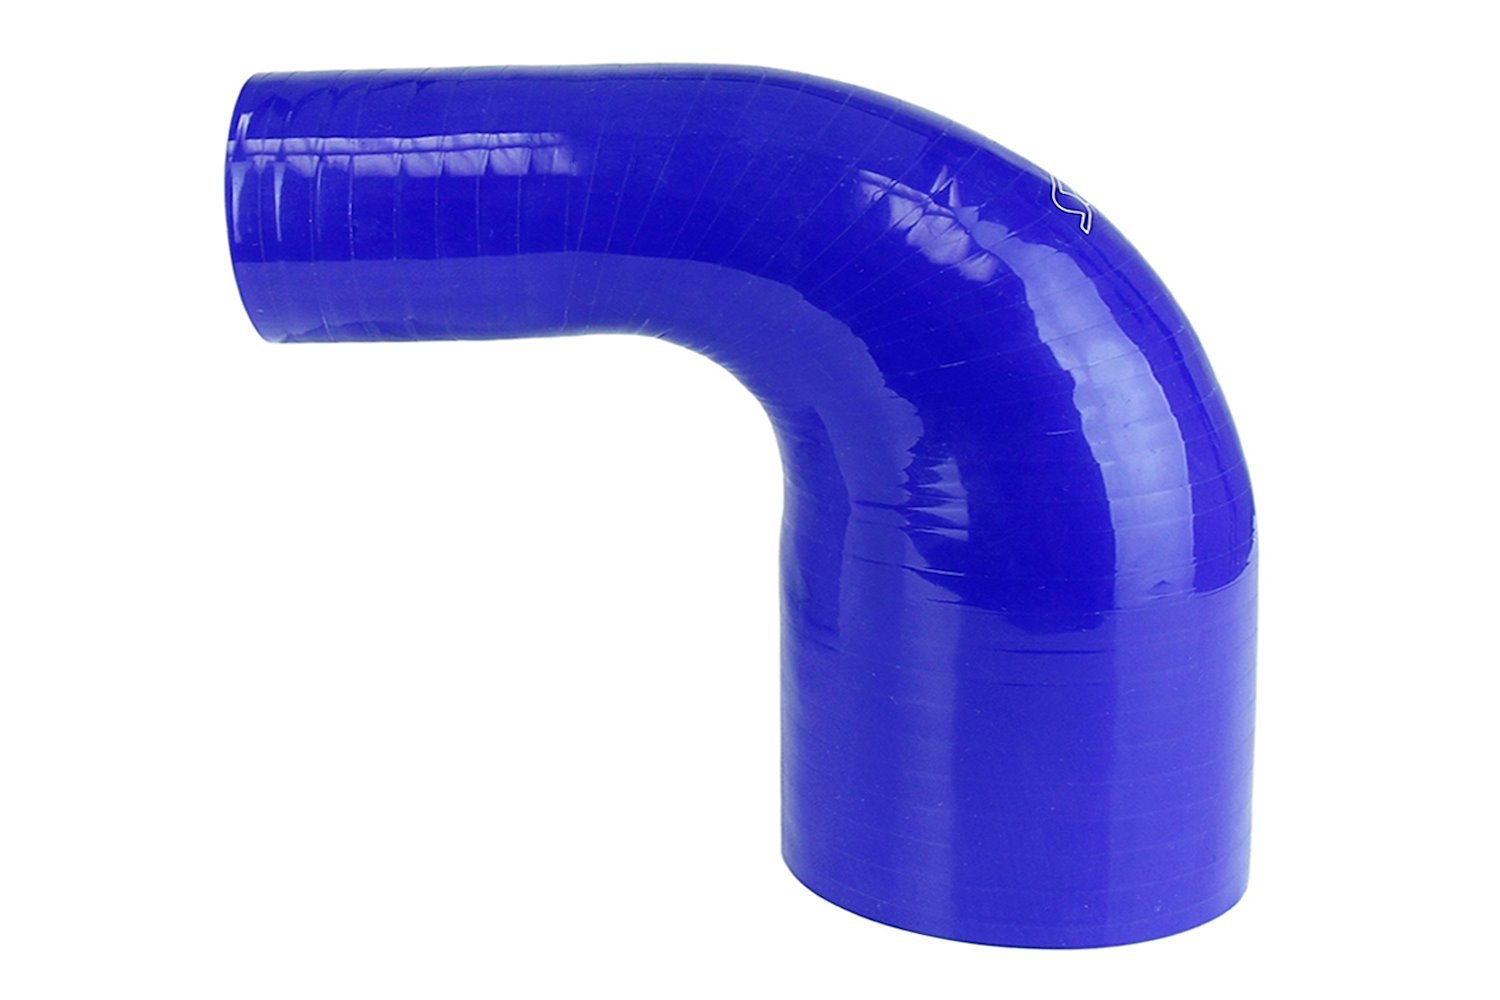 HTSER90-450-500-BLUE Silicone 90-Degree Elbow Hose, High-Temp 4-Ply Reinforced, 4-1/2 in. - 5 in. ID, Blue